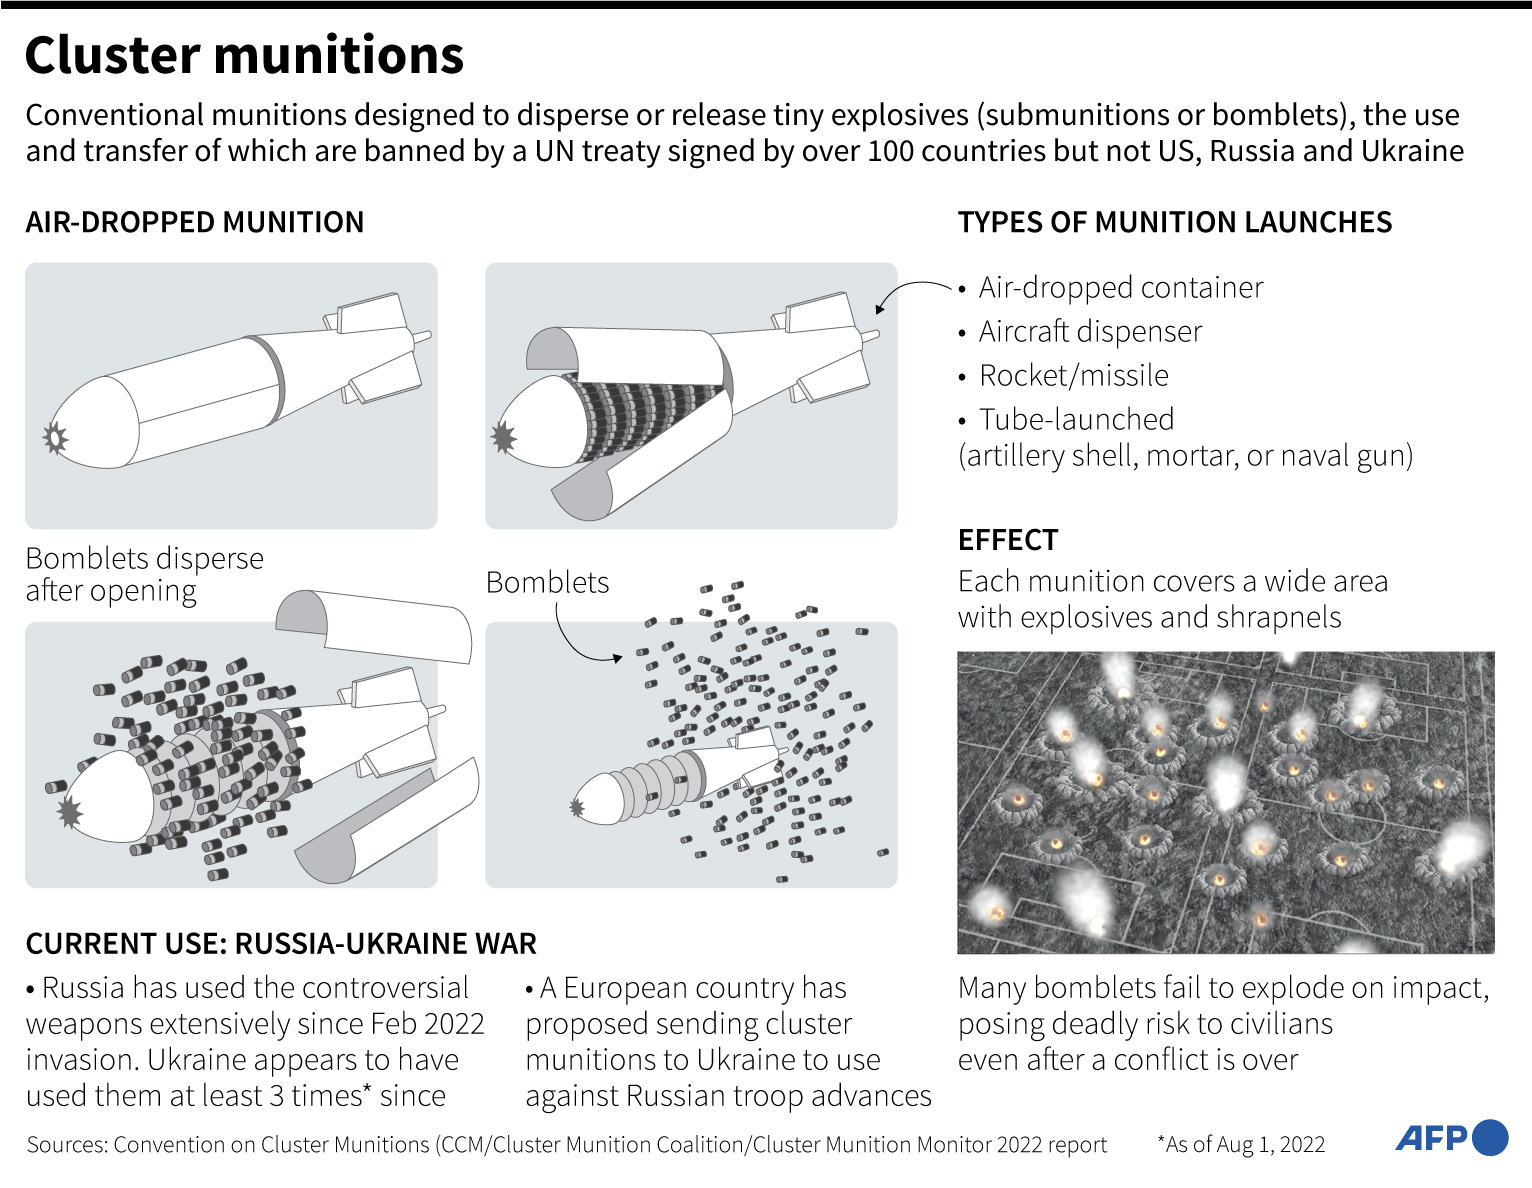 Graphic on cluster munitions, designed to disperse or release tiny explosives, used in the Ukraine-Russia war.